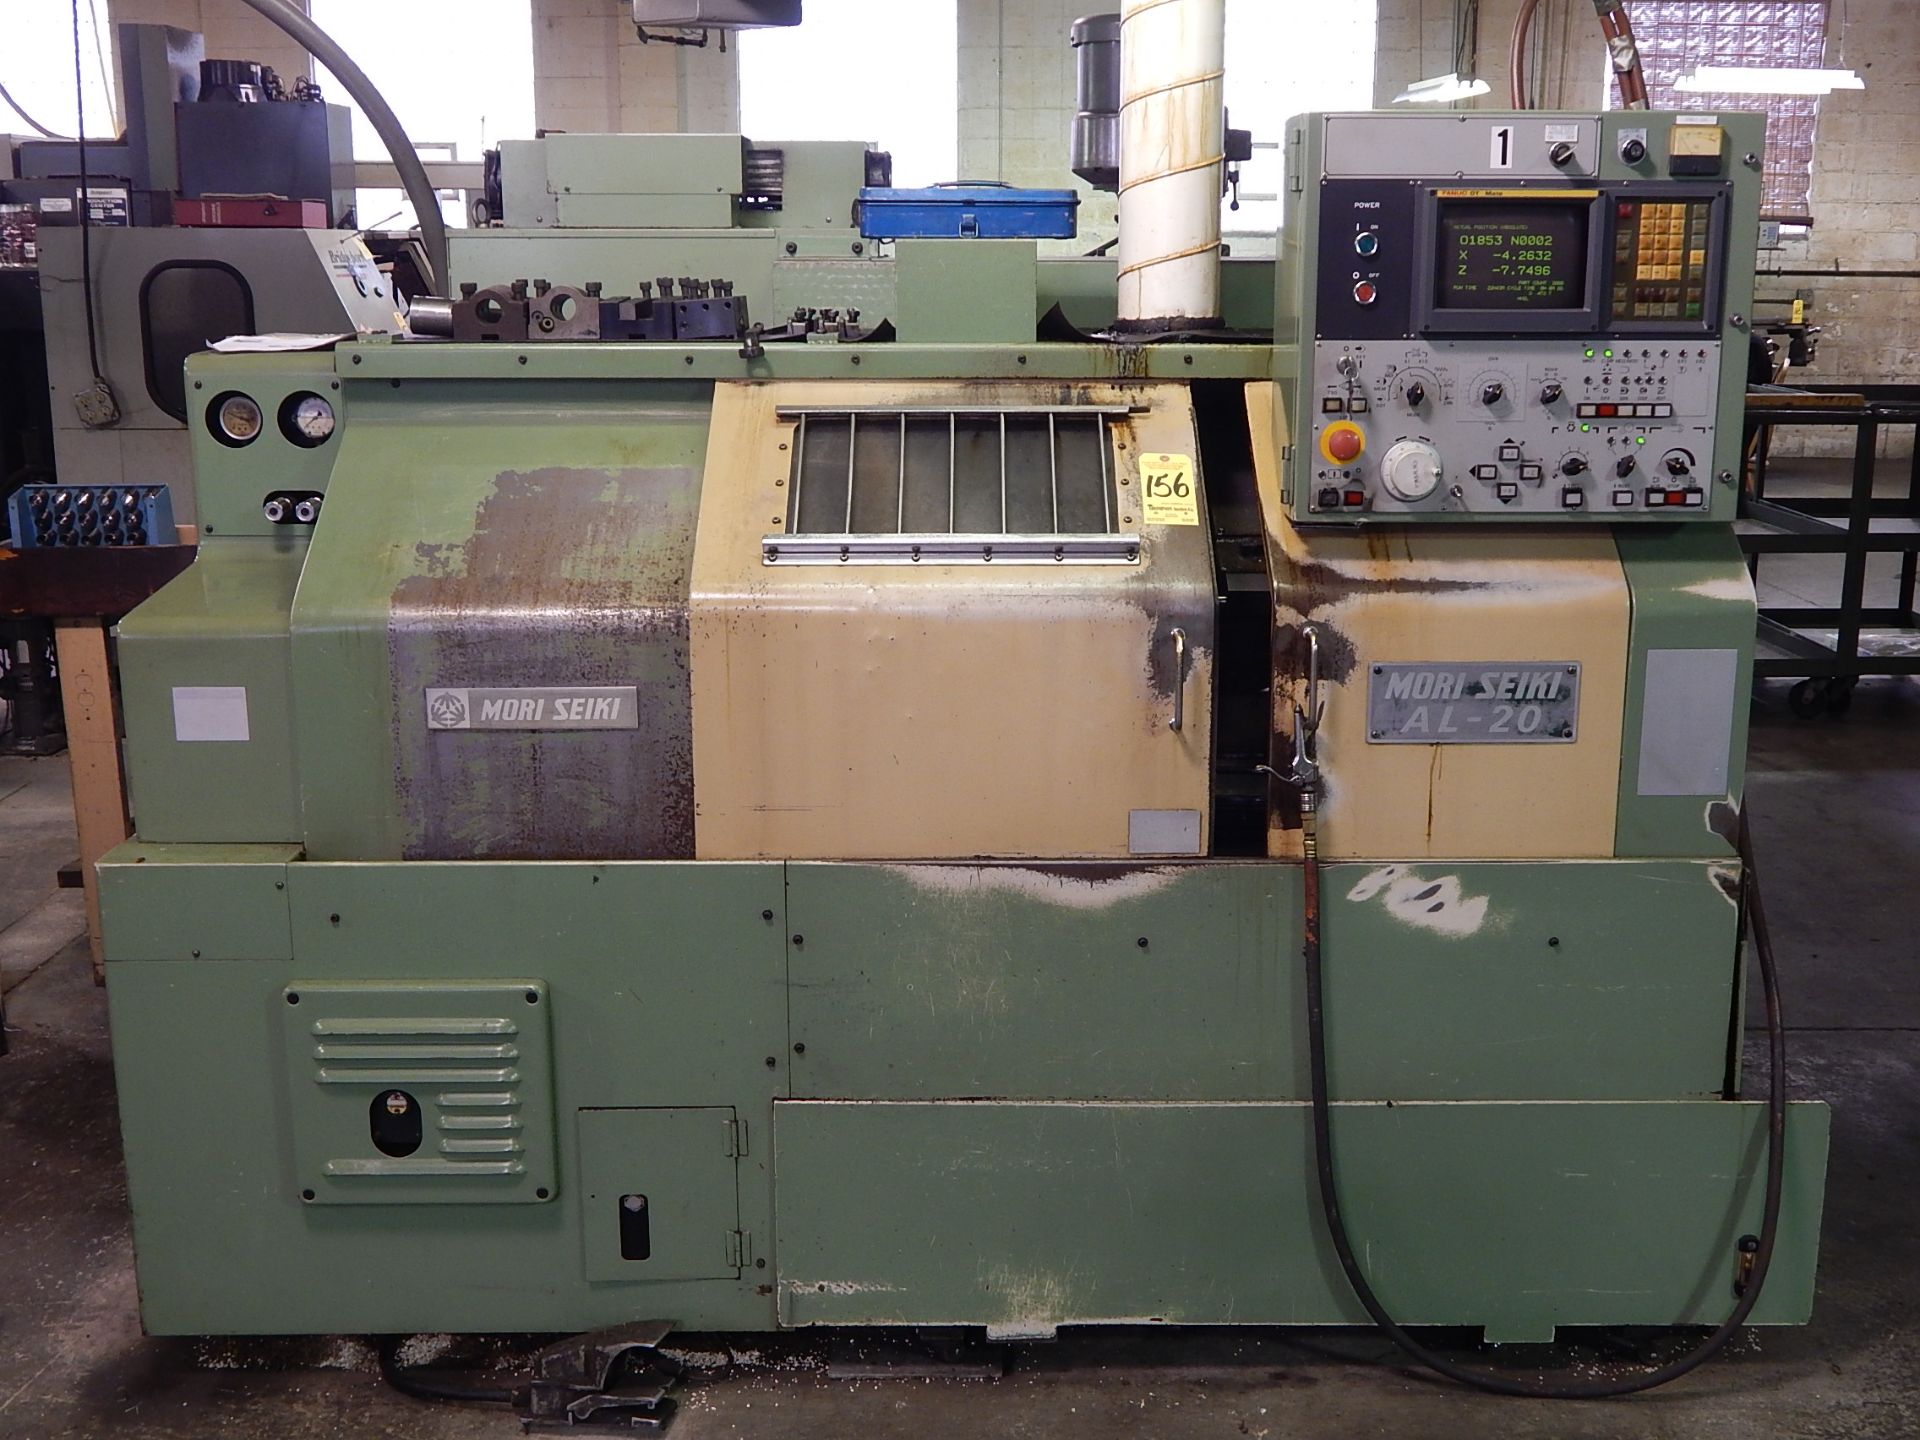 Mori-Seiki AL-20, CNC Turning Center, s/n 2796, 8 In. 3-Jaw Chuck, 8 Station Turret, Tailstock,